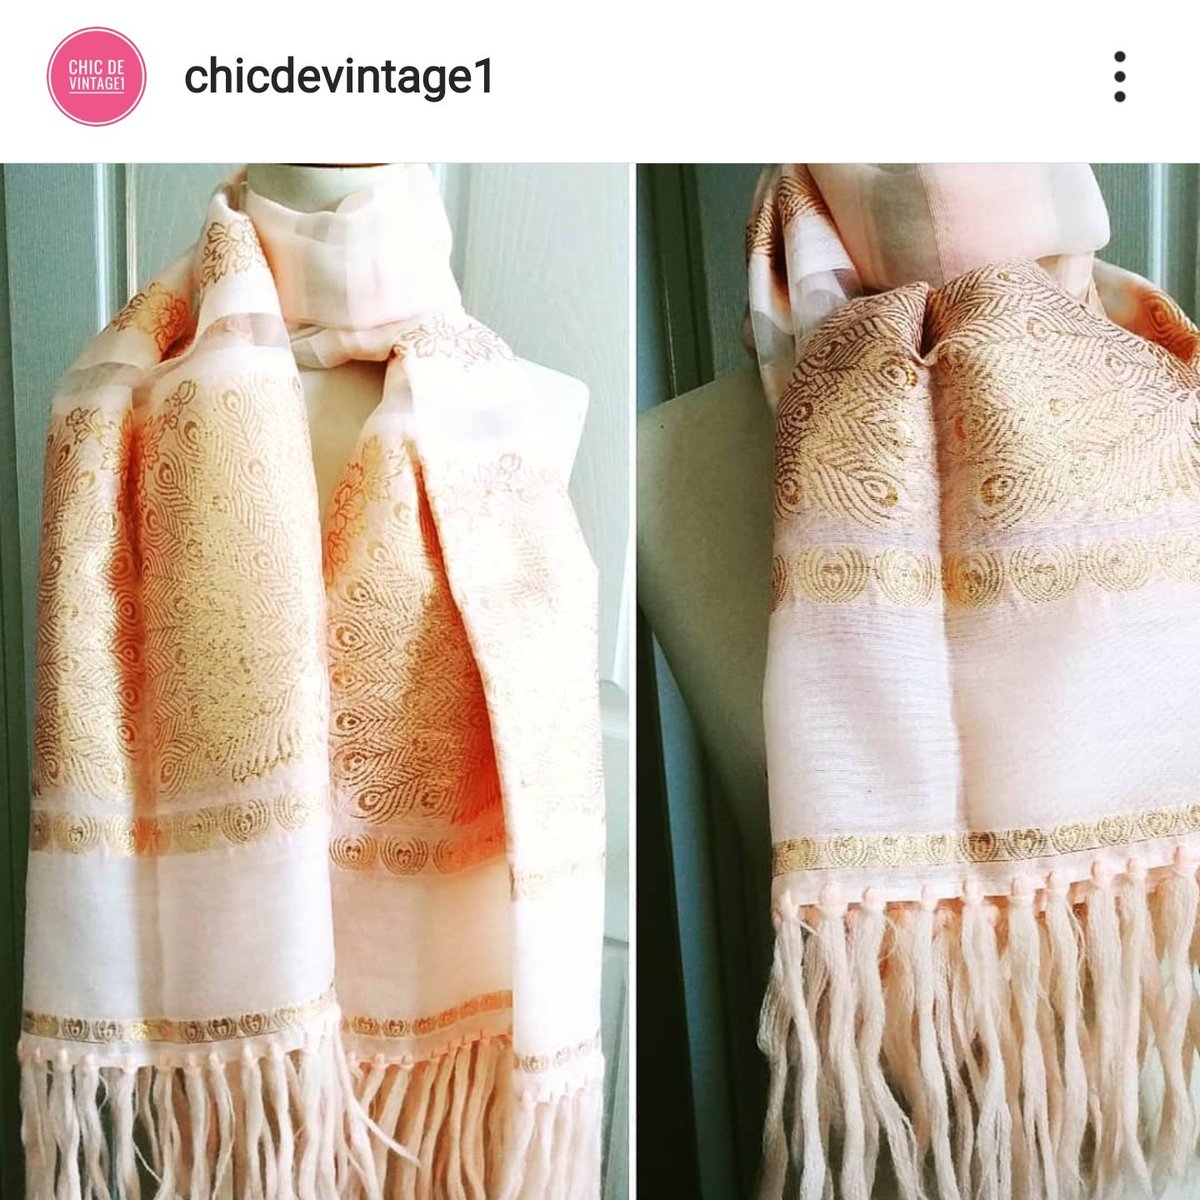 #SOLD Pretty in Pink Silk Wool  Shawl Scarf with Golden Peacock Woven Designs  @chicdevintage1 on #etsy #fallfashion #fashionscarf
 #vintagefashion #sustainablefashion #vintagefashion #onsale #onlineshopping #worldwideshipping #etsyshop

https://t.co/OALJTtHQBs https://t.co/qHI6KyQbHW